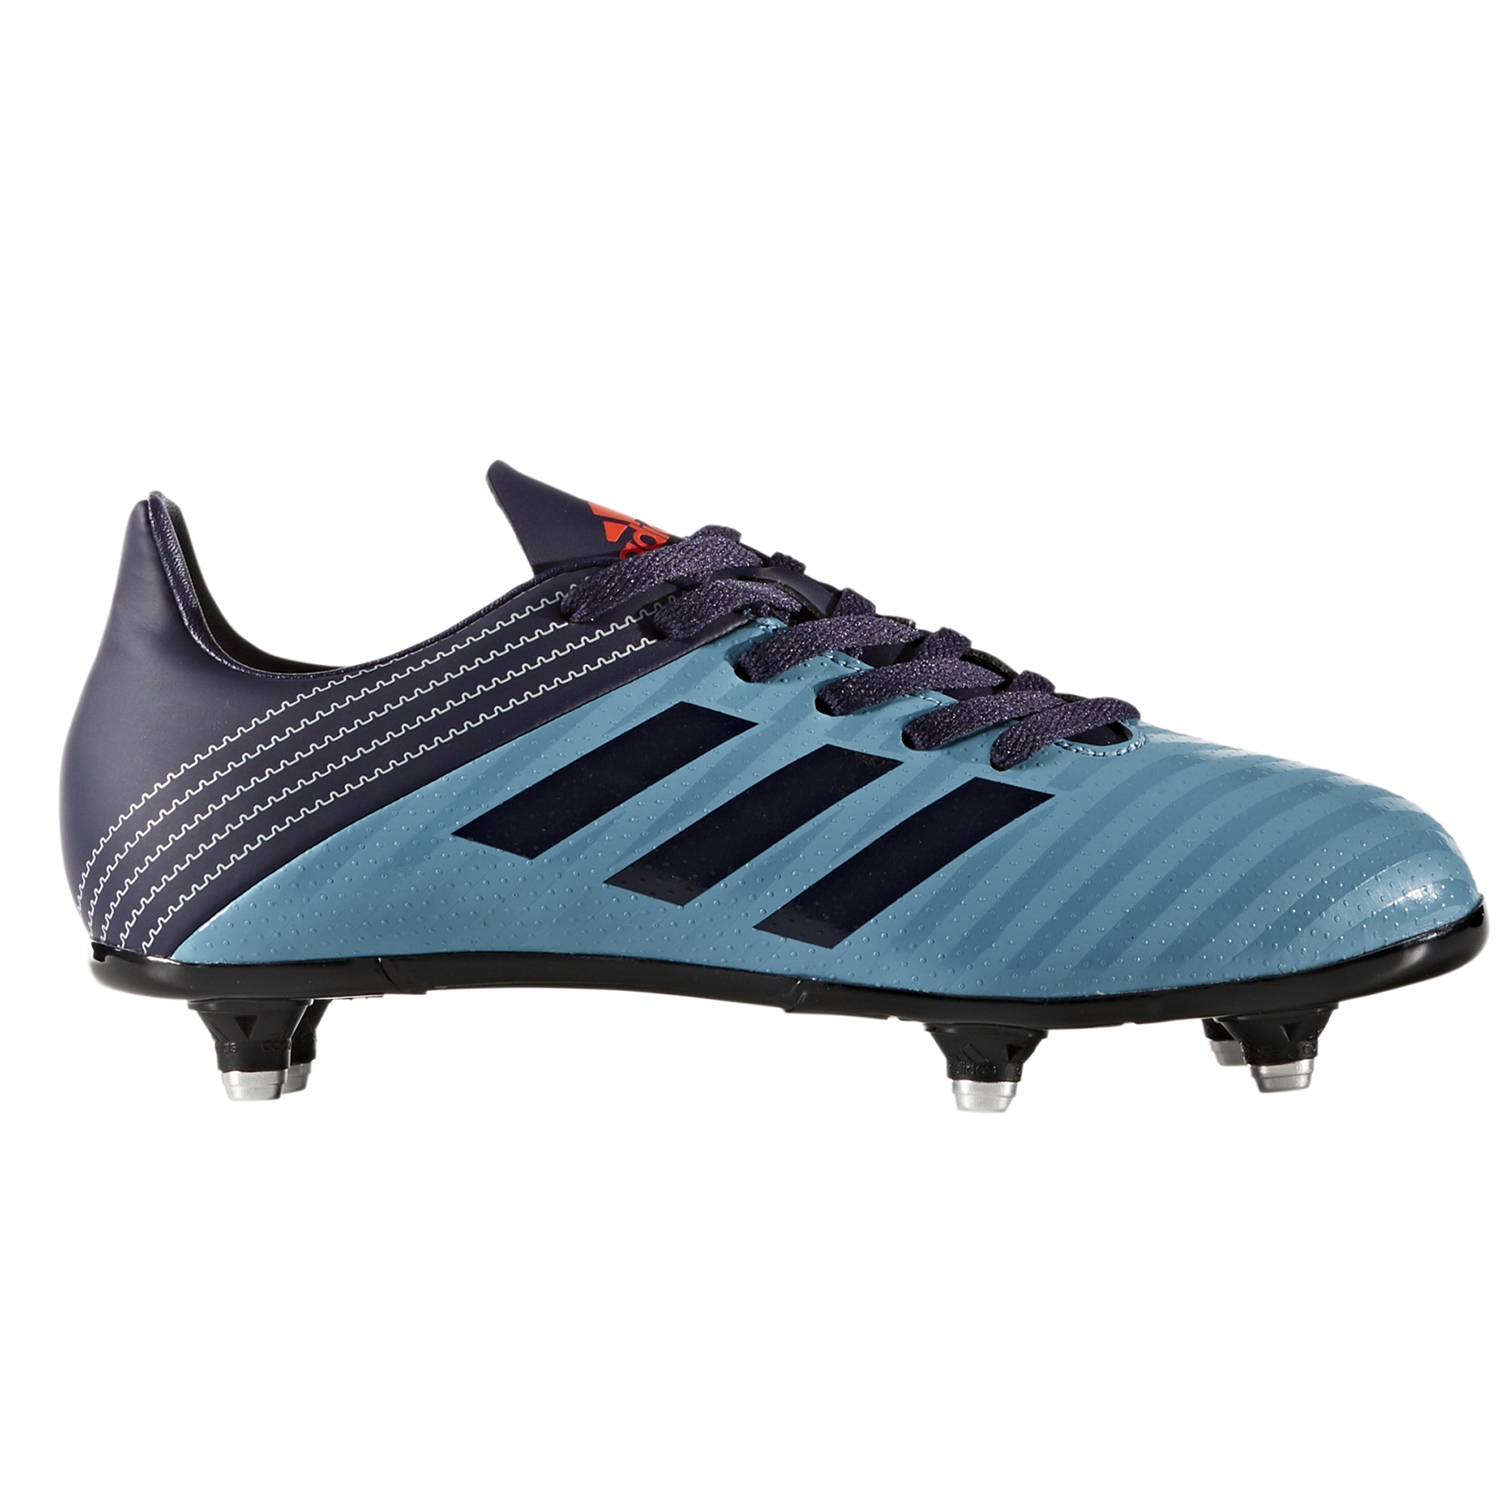 Buy Adidas Crazyquick Malice Sg Rugby Boots Black Shop Every